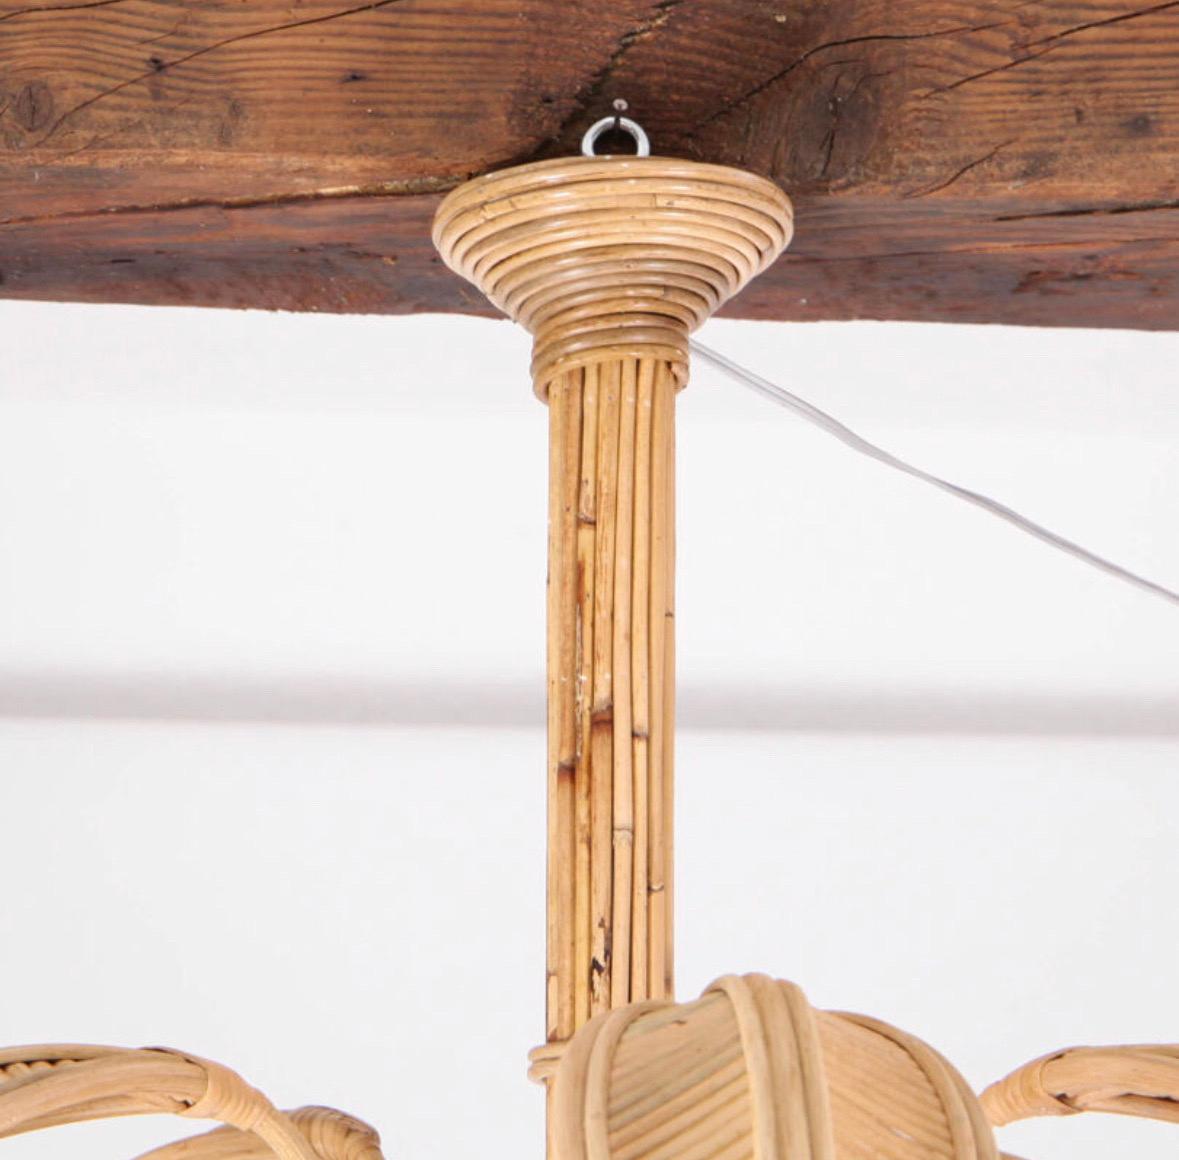 Rattan « coconut tree/palm tree » ceiling light In Excellent Condition For Sale In Isle Sur Sorgue, FR